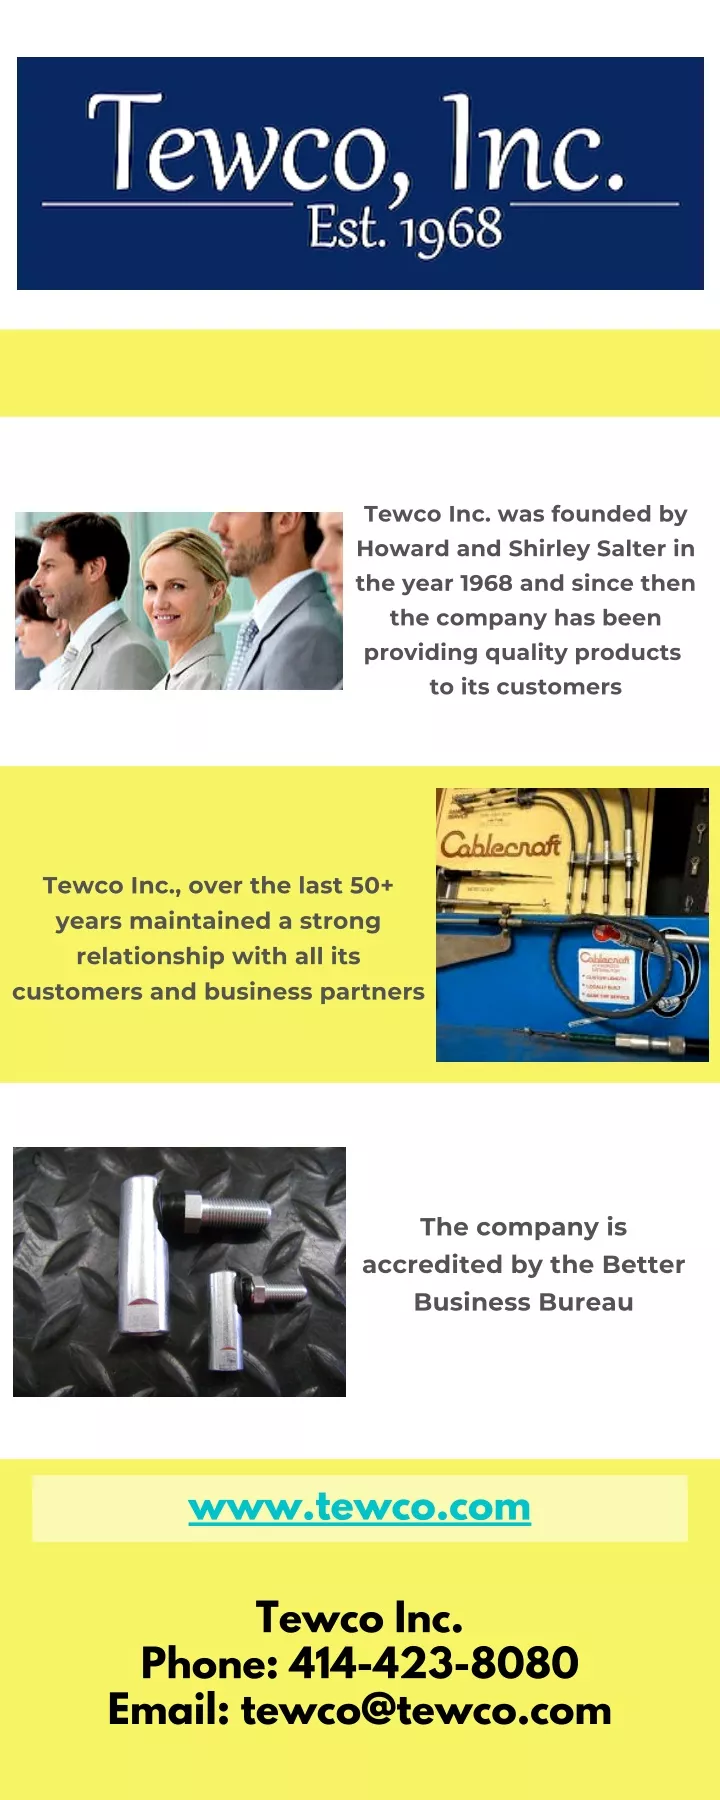 tewco inc was founded by howard and shirley